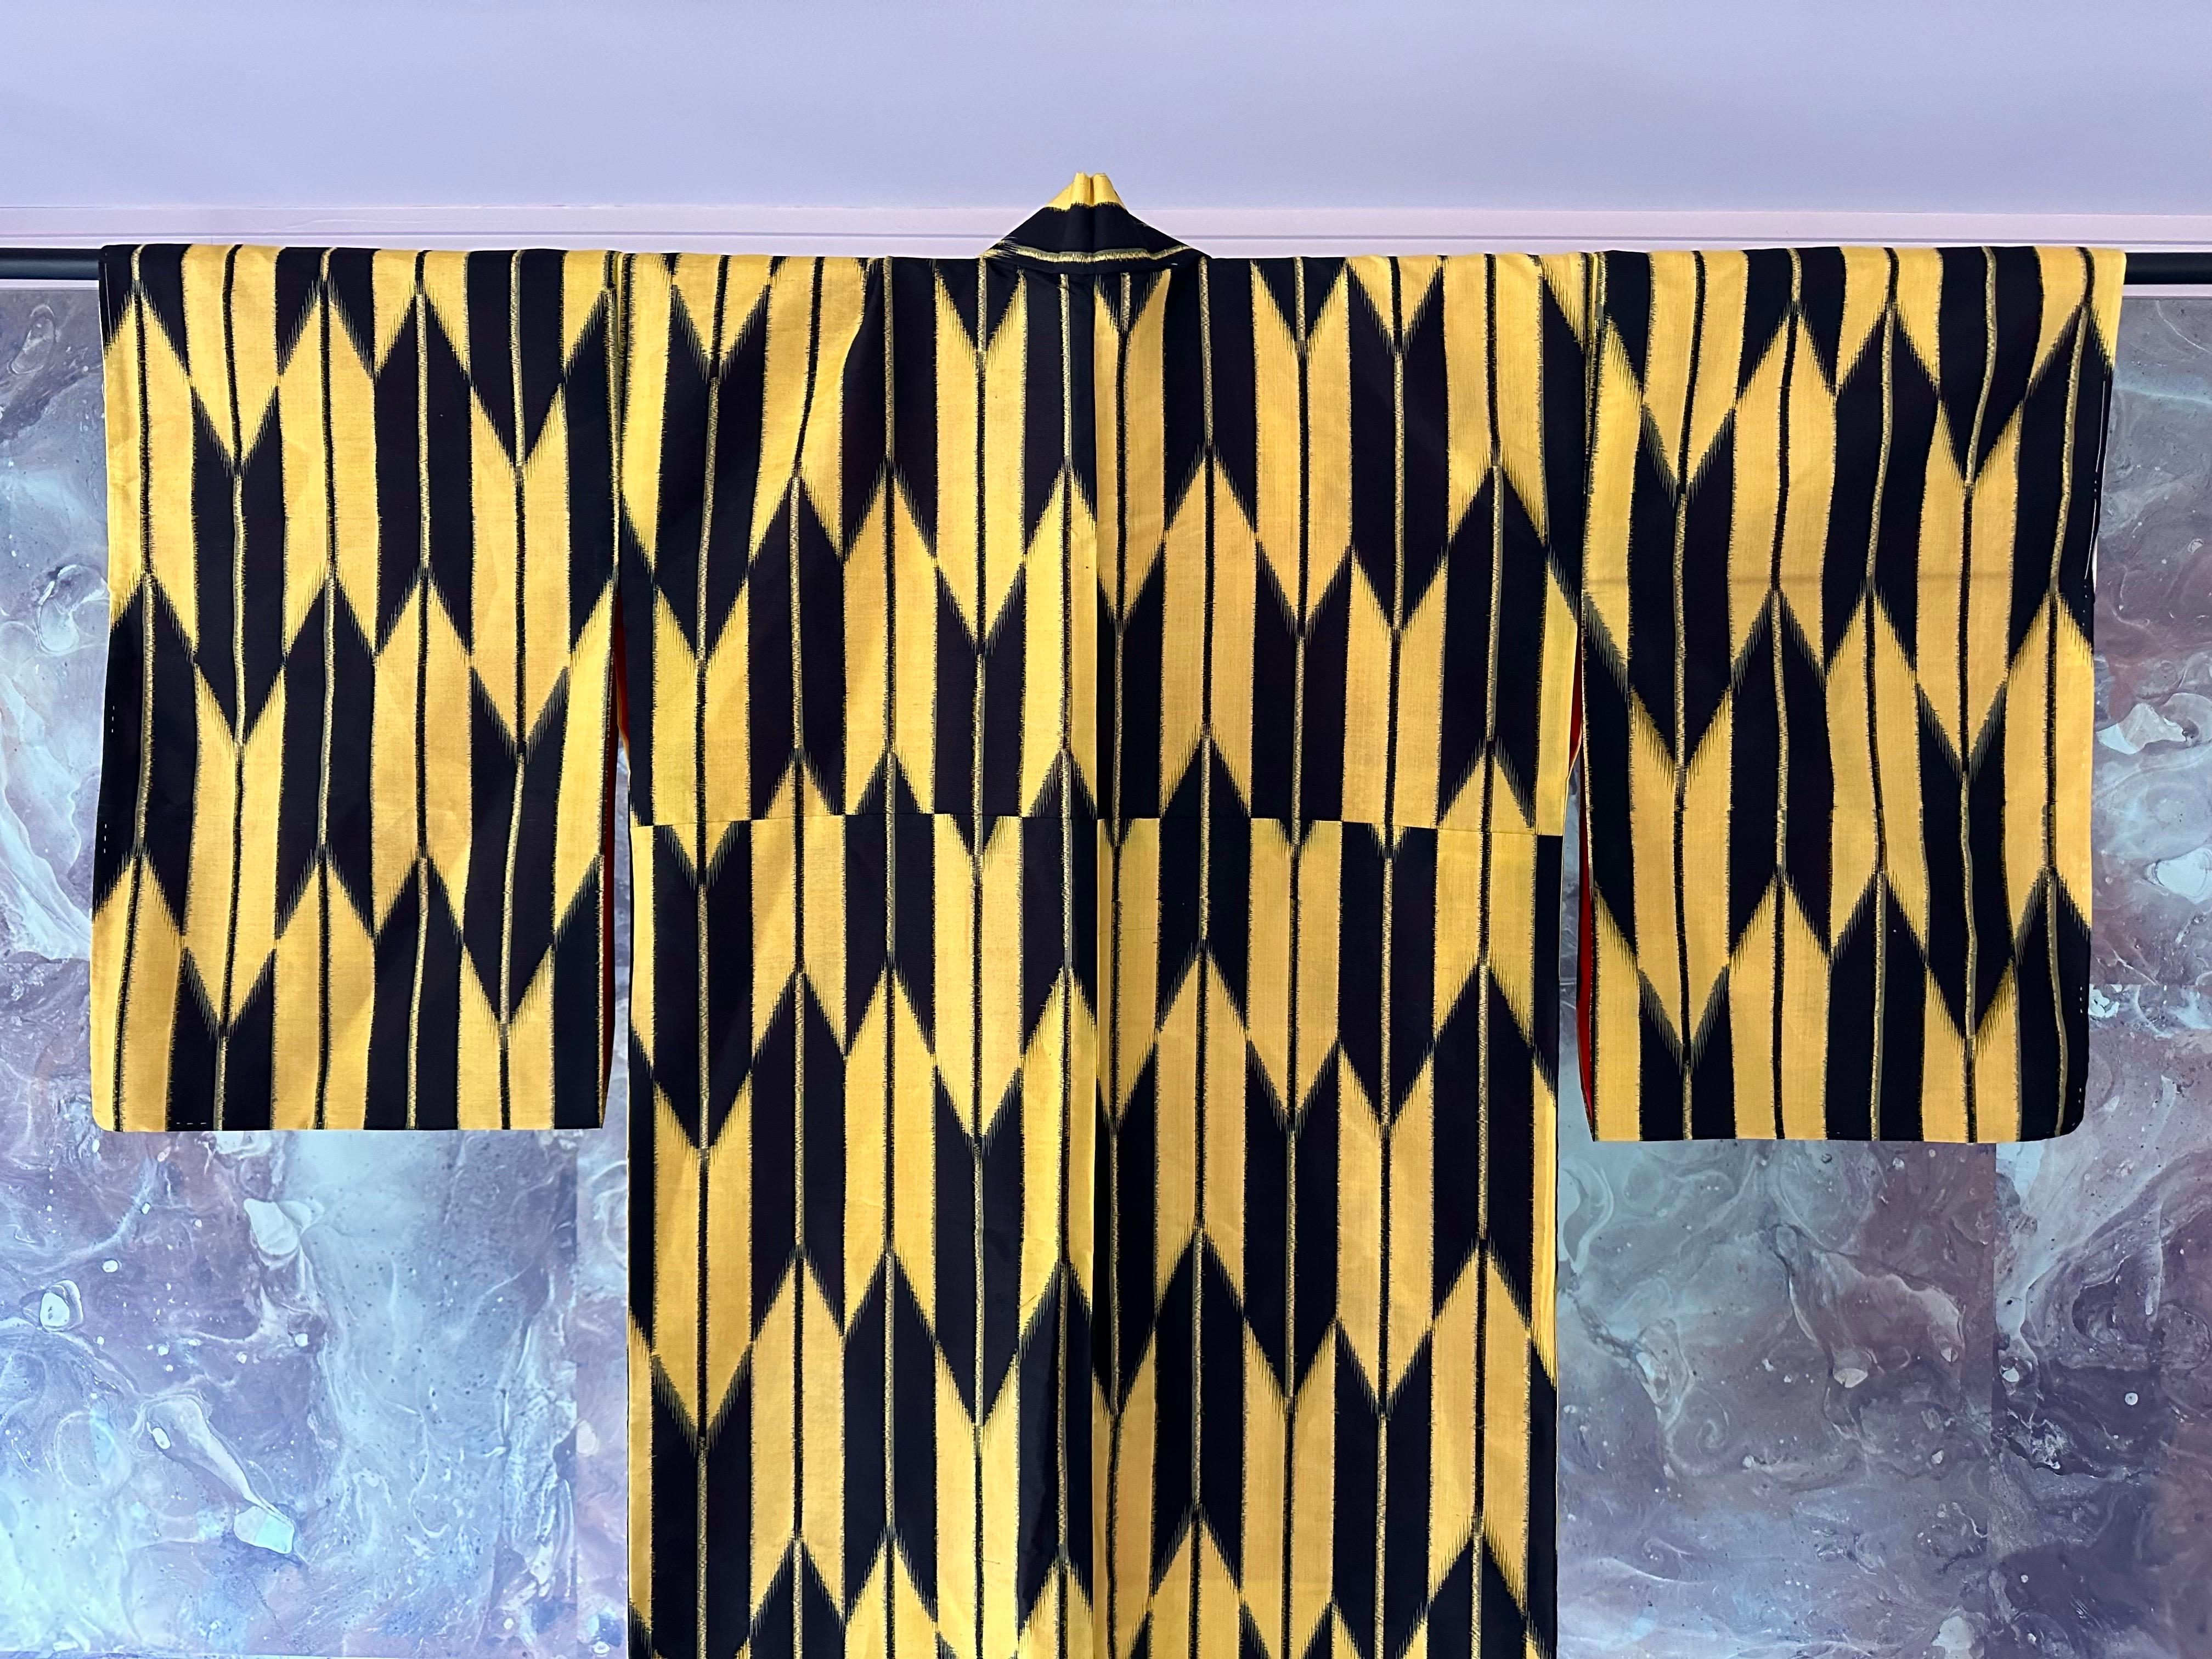 A well preserved Japanese Meisen kimono hand-sewn from woven Ikat Silk circa 1920-30s (Taisho to early Showa period). The kosode style kimono (small sleeve), tailored from raw silk with bold geometrical pattern of arrowheads and lines in contrasting